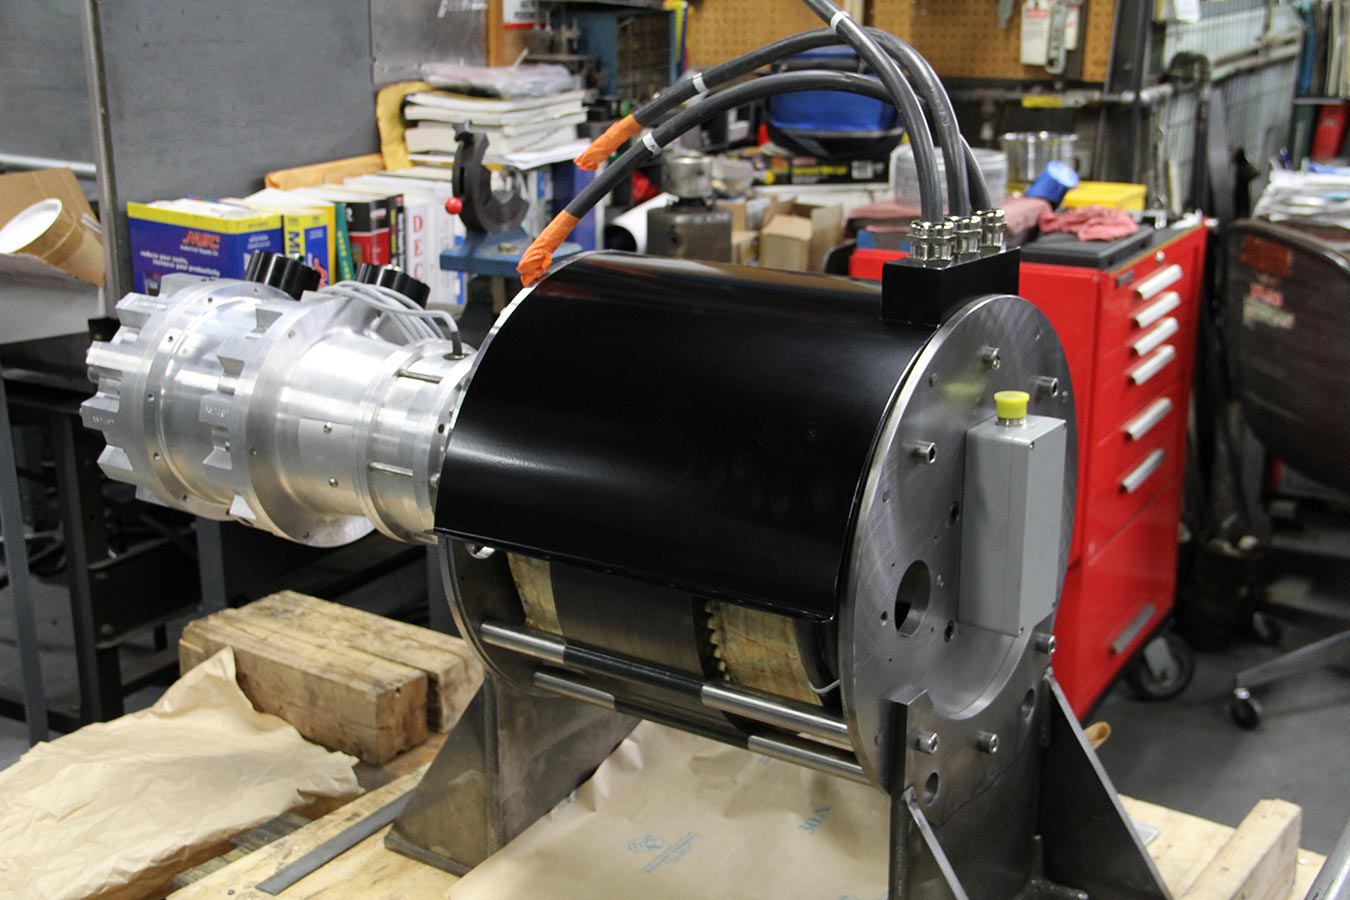 Assembled HEV EV Traction Drive Motor made in the USA by Orchid